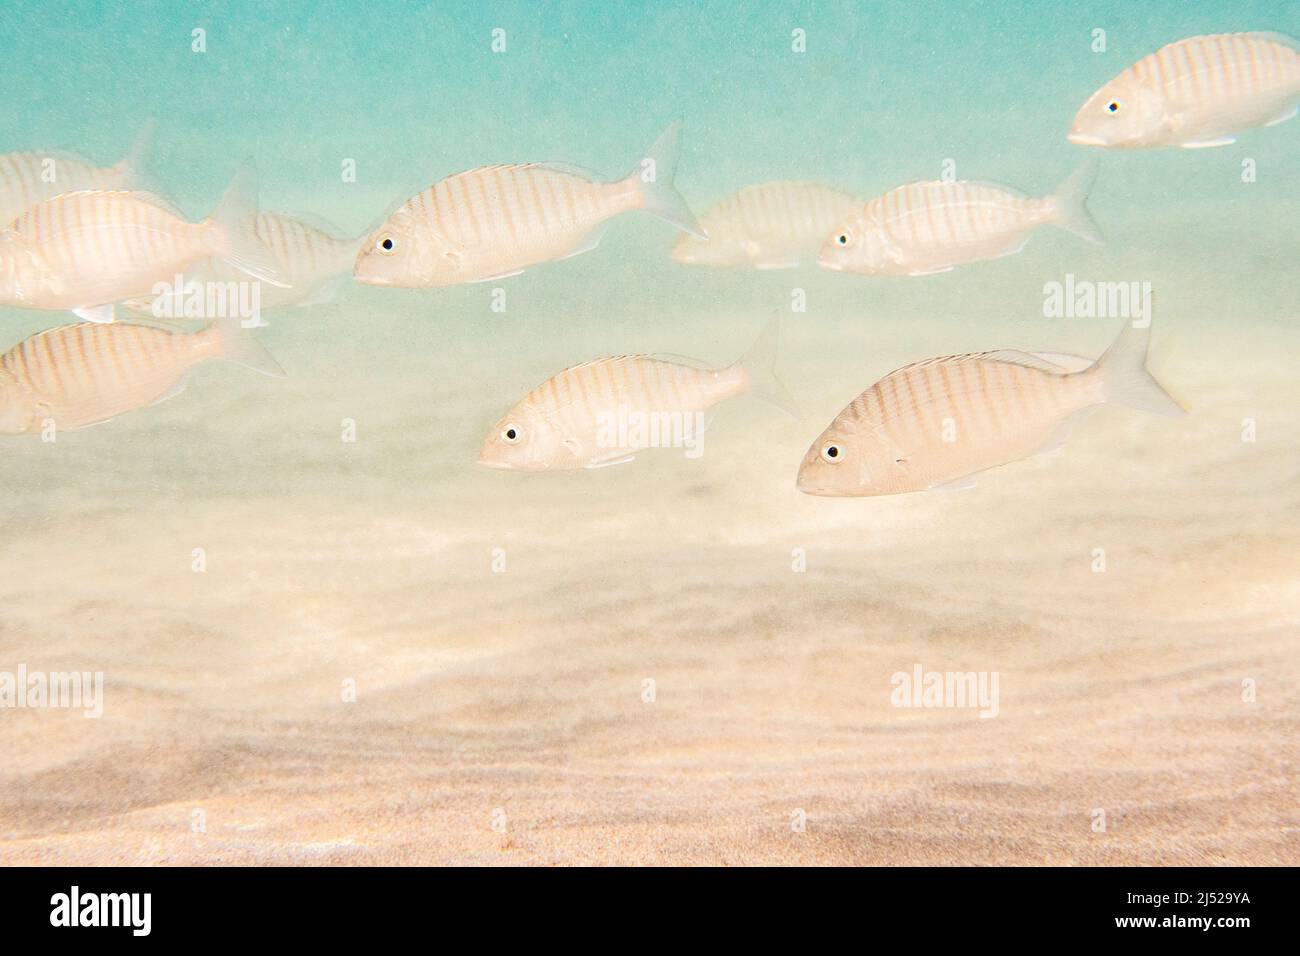 The sand steenbras or striped seabream (Lithognathus mormyrus) is a species of marine fish in the family Sparidae. Stock Photo